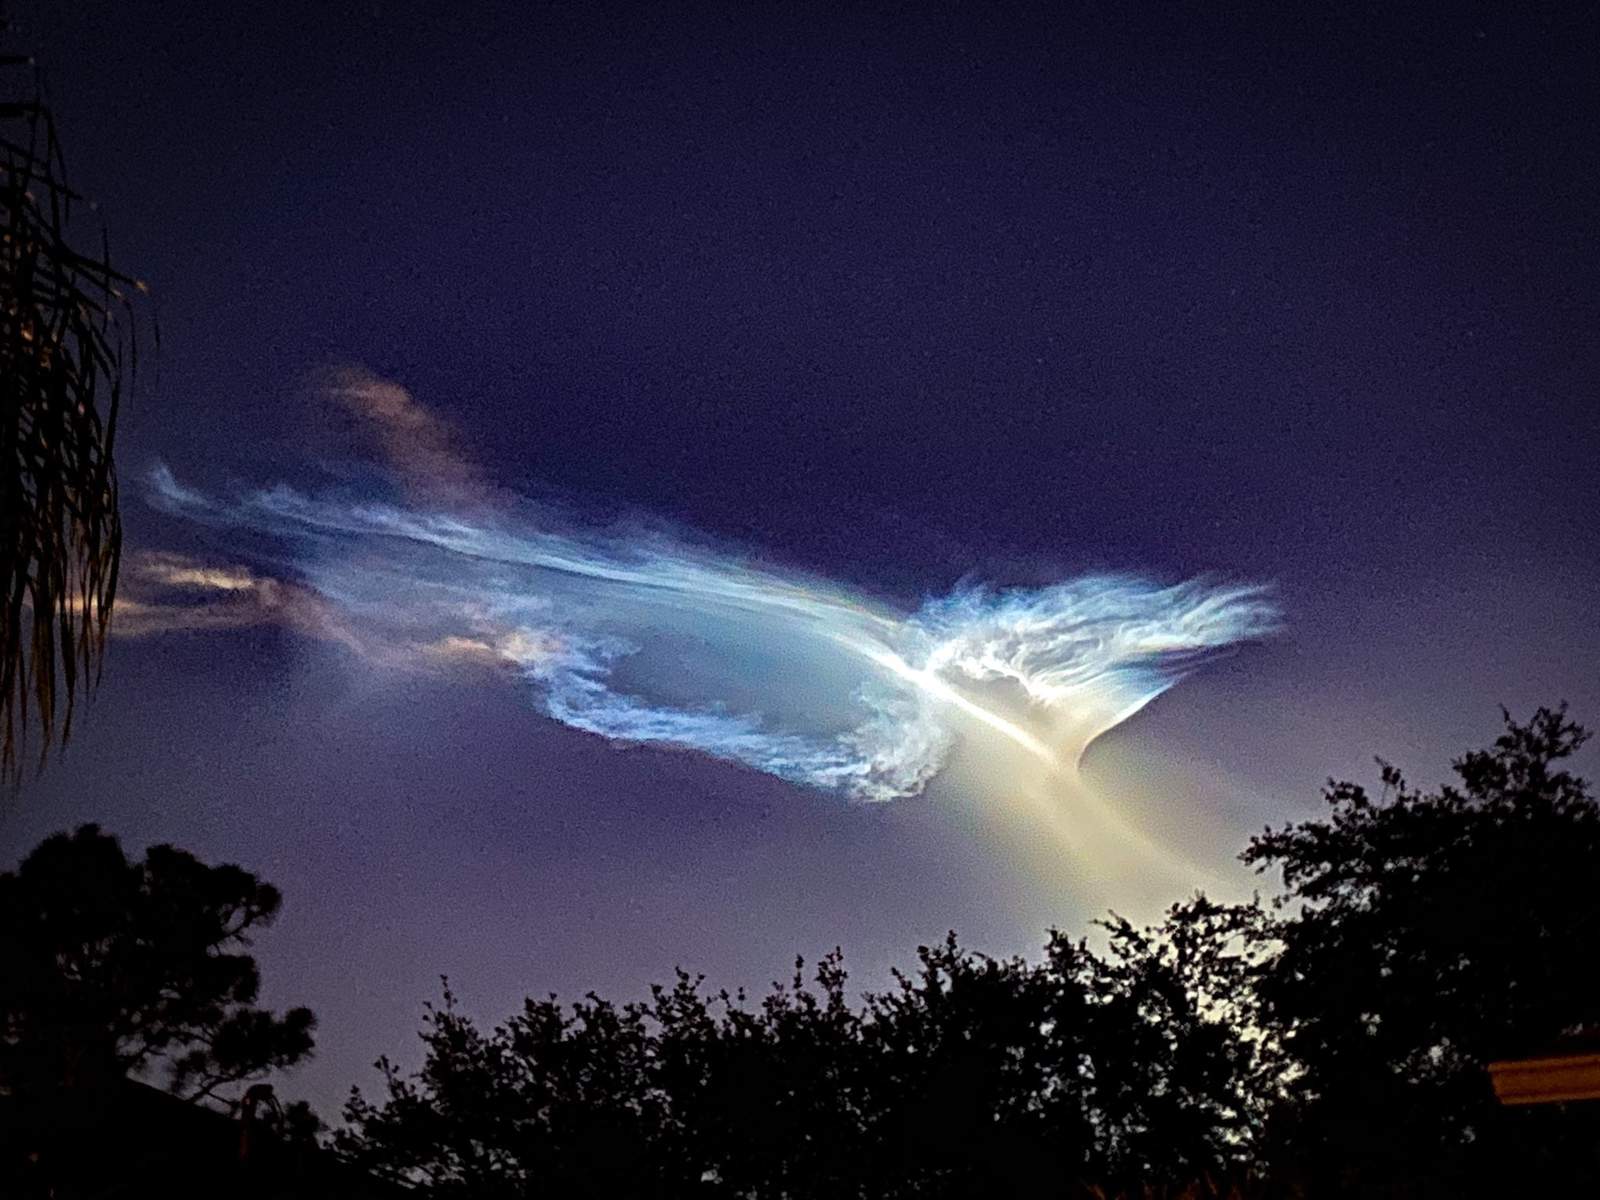 Pictures of a ‘glowing cloud’ following SpaceX’s Falcon 9 launch will leave you in awe